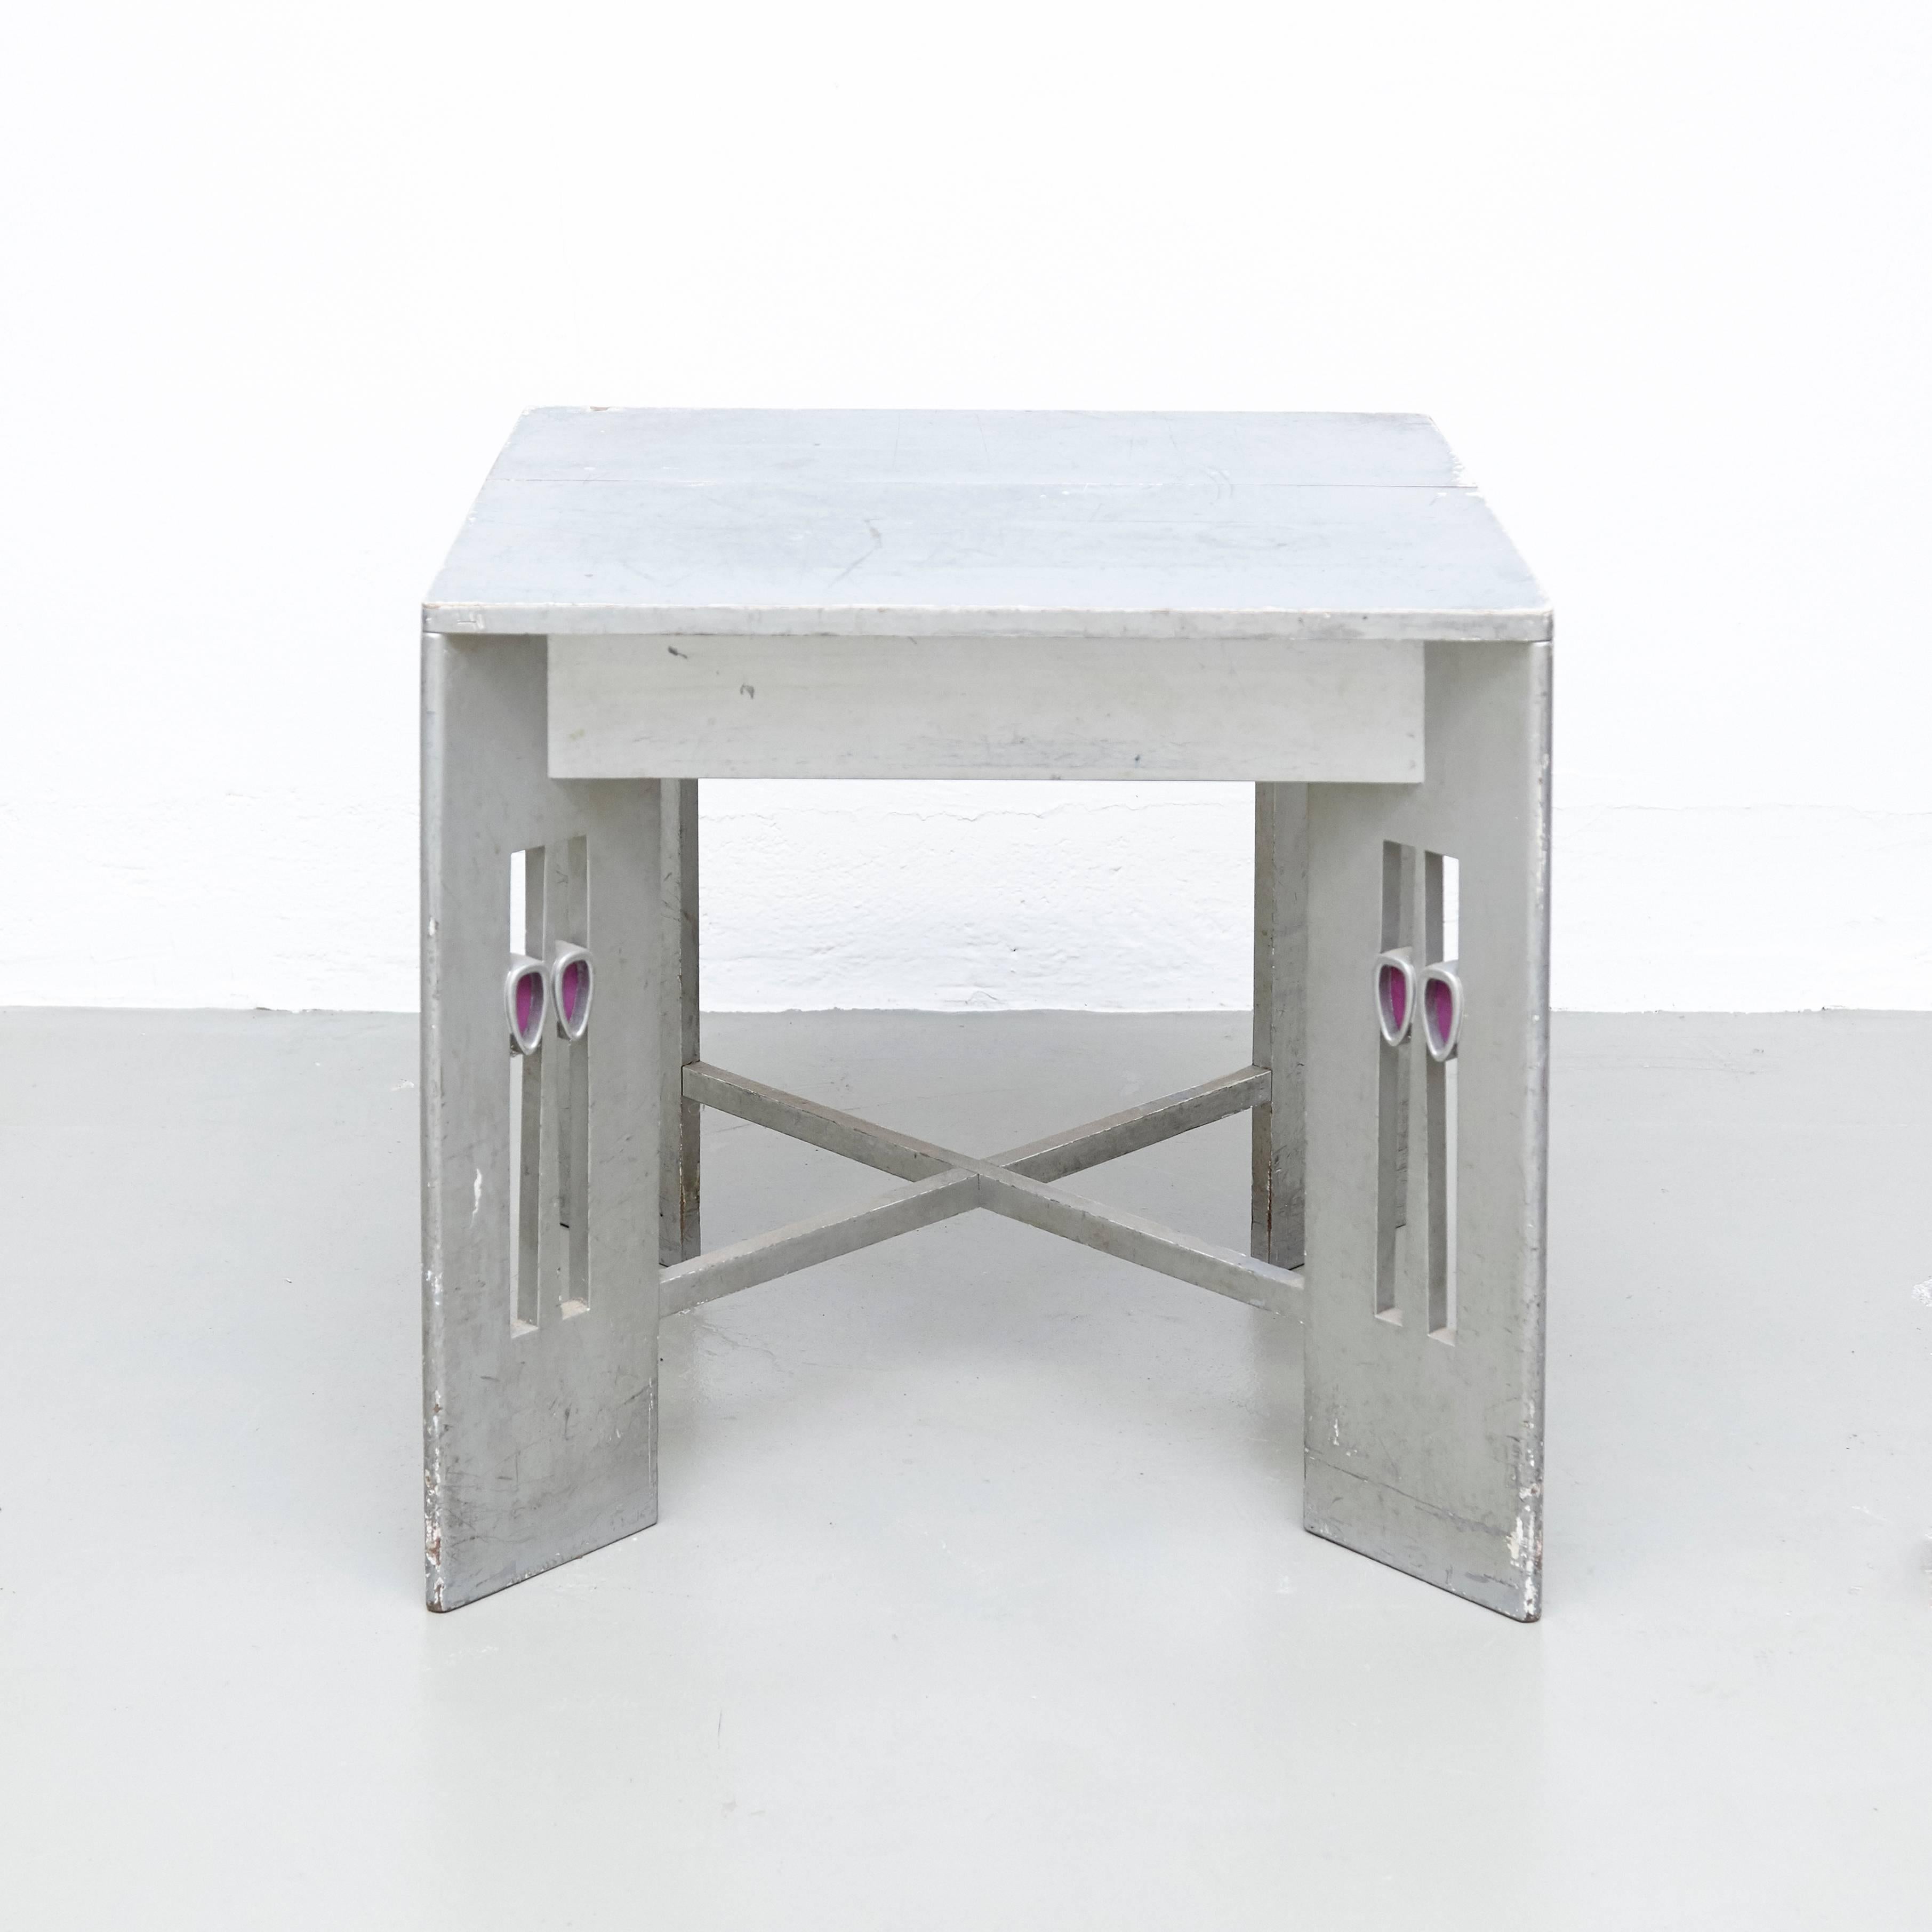 Willow tea rooms table designed by Charles Rennie Mackintosh.
Manufactured by BD, circa 1980.
Silver lacquered wood

In good original condition, with minor wear consistent with age and use, preserving a beautiful patina.

Charles Rennie